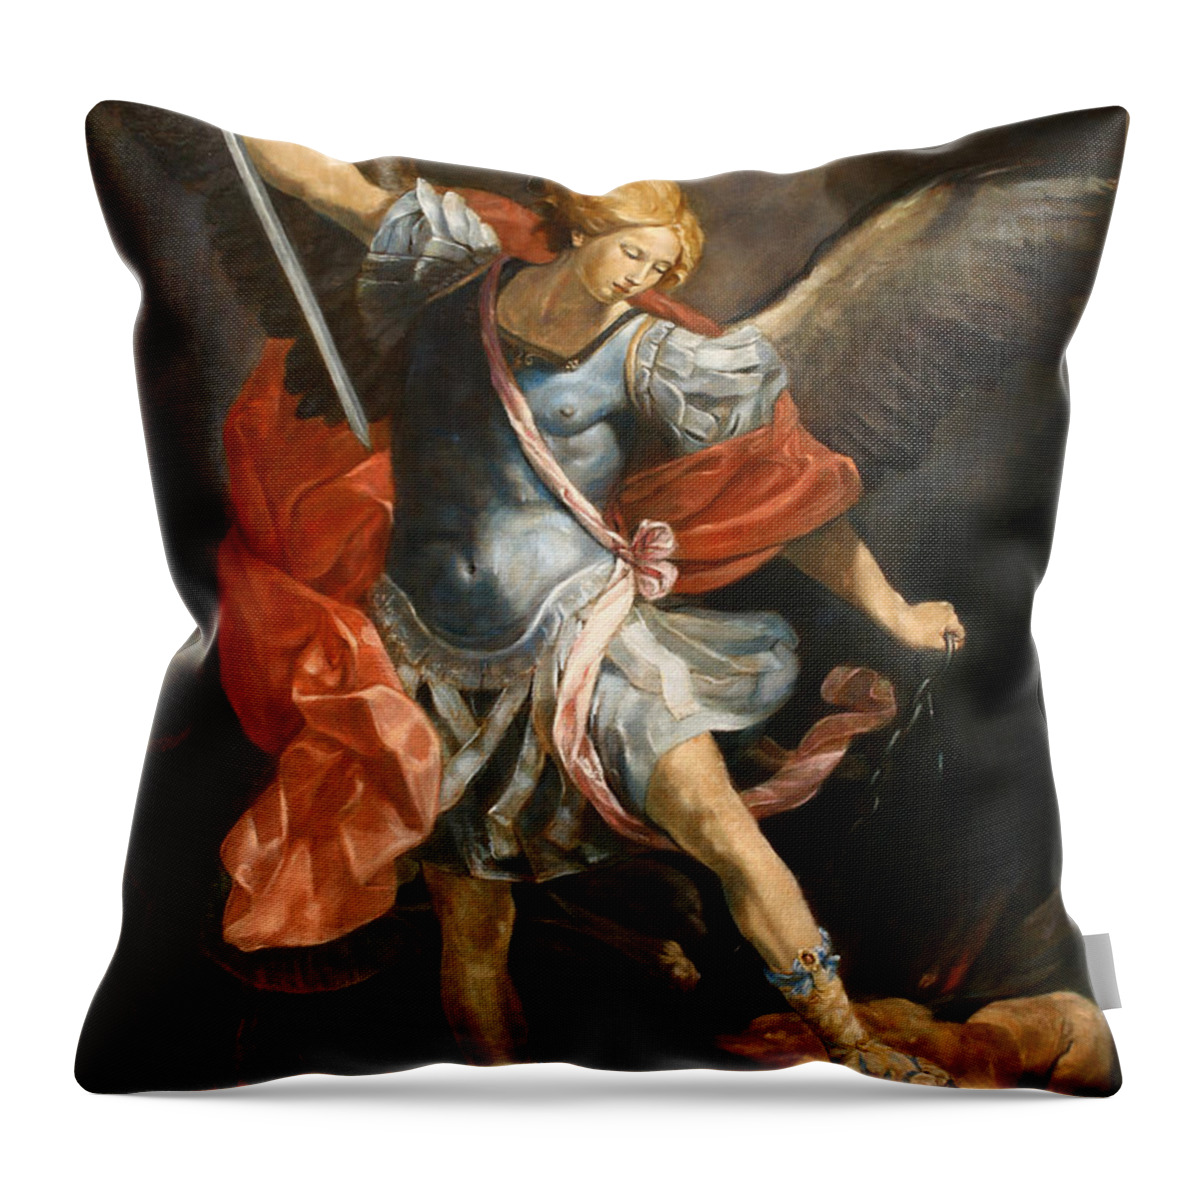 Realism Throw Pillow featuring the painting Archangel Michael by Darko Topalski